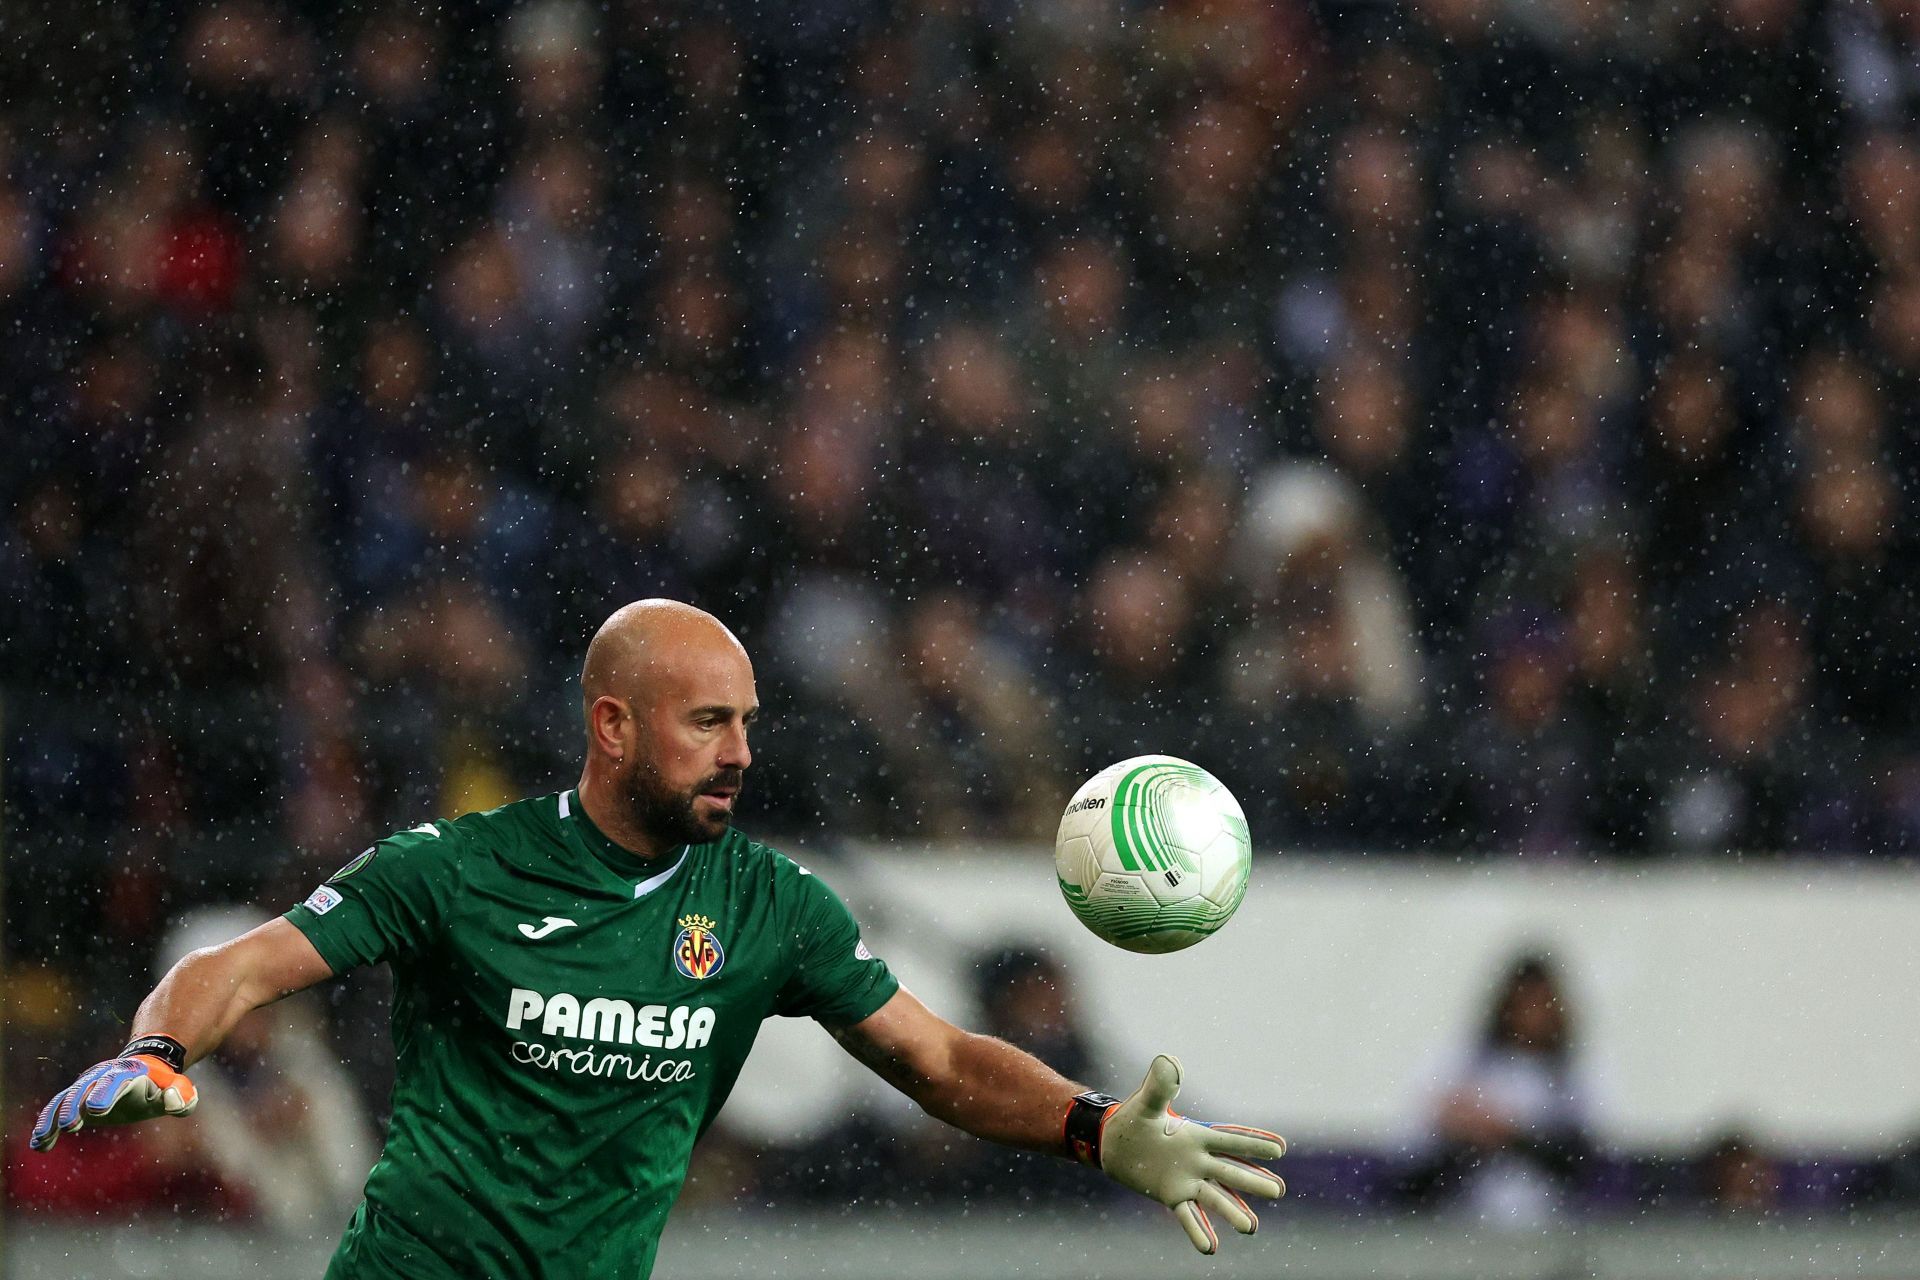 Pepe Reina is the first-choice keeper of Villarreal for the second half of this season